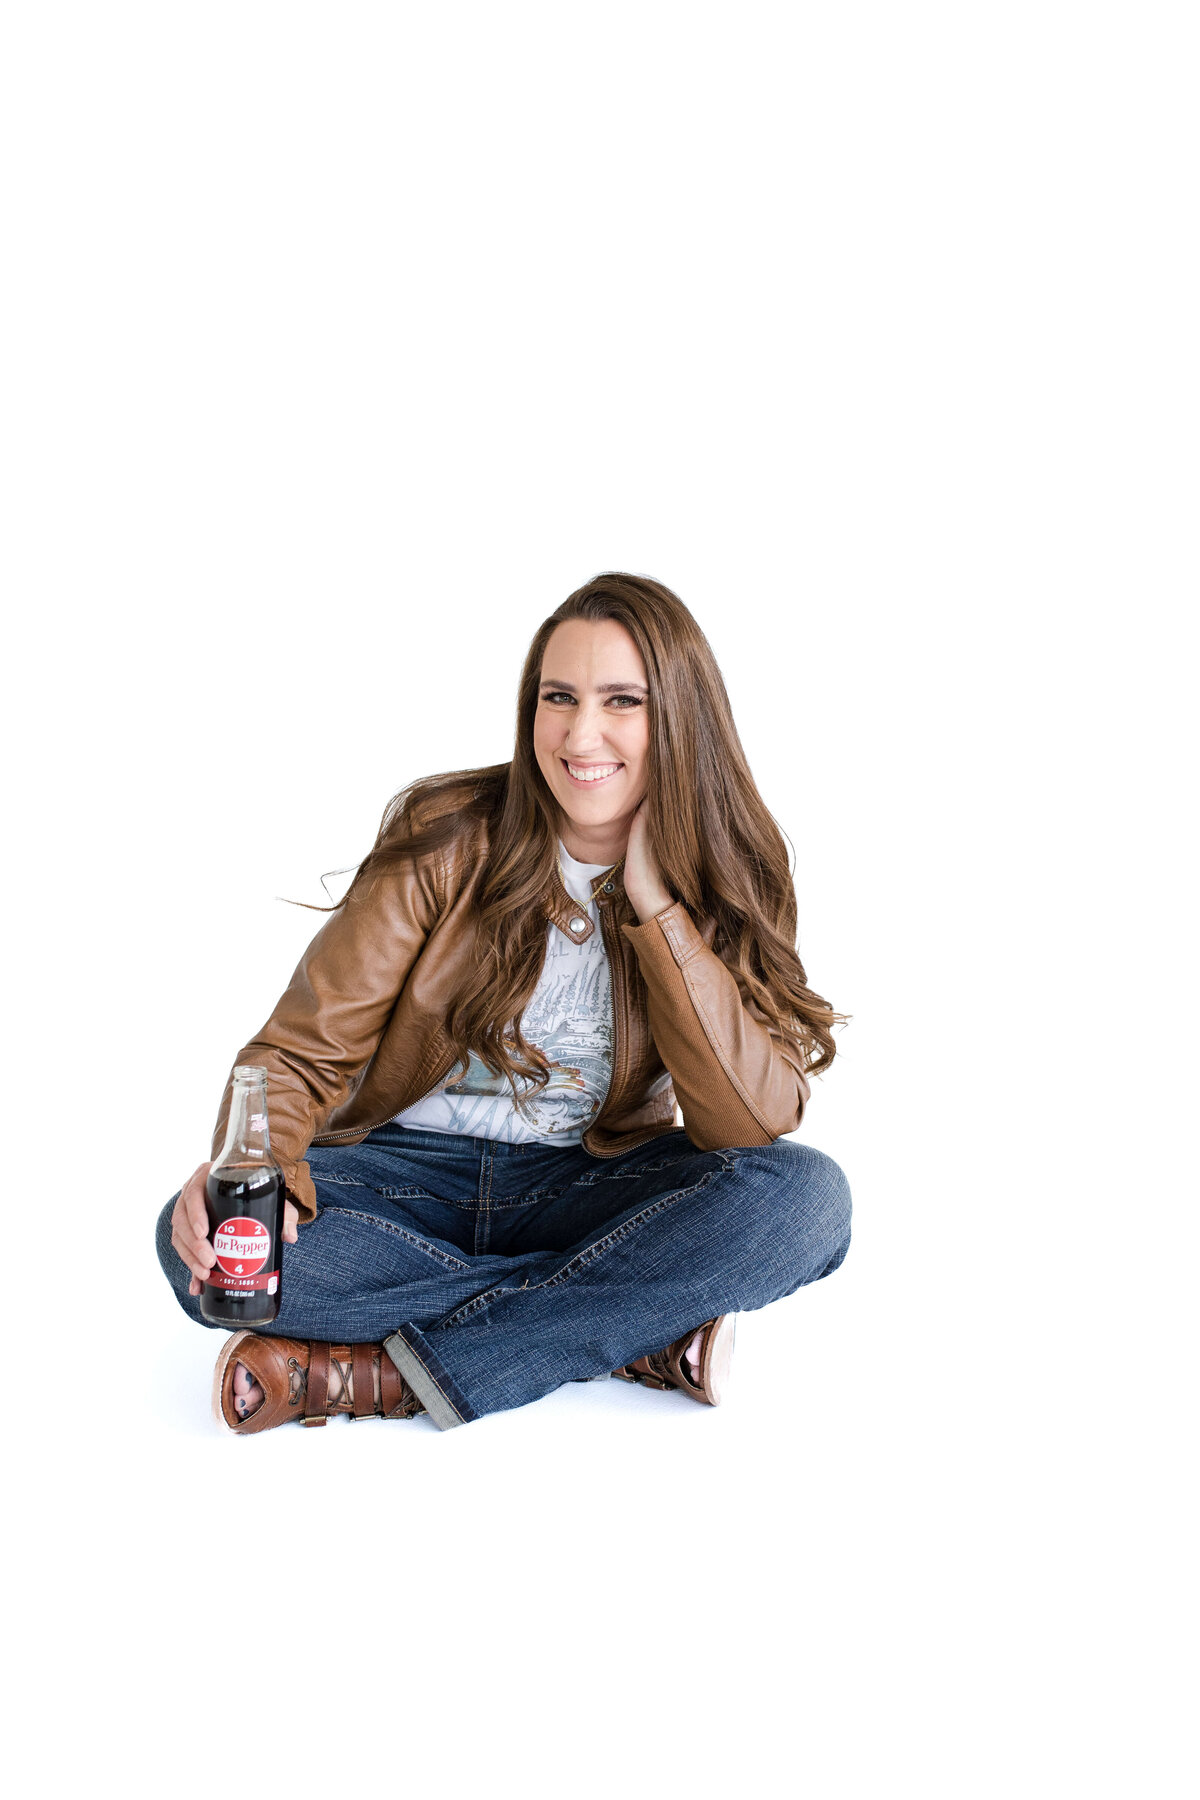 brand photographer near me photographs brand photo with woman sitting criss cross while wearing jeans and a brown leather jacket holding a coke bottle and smiling as she rests her head on her hand